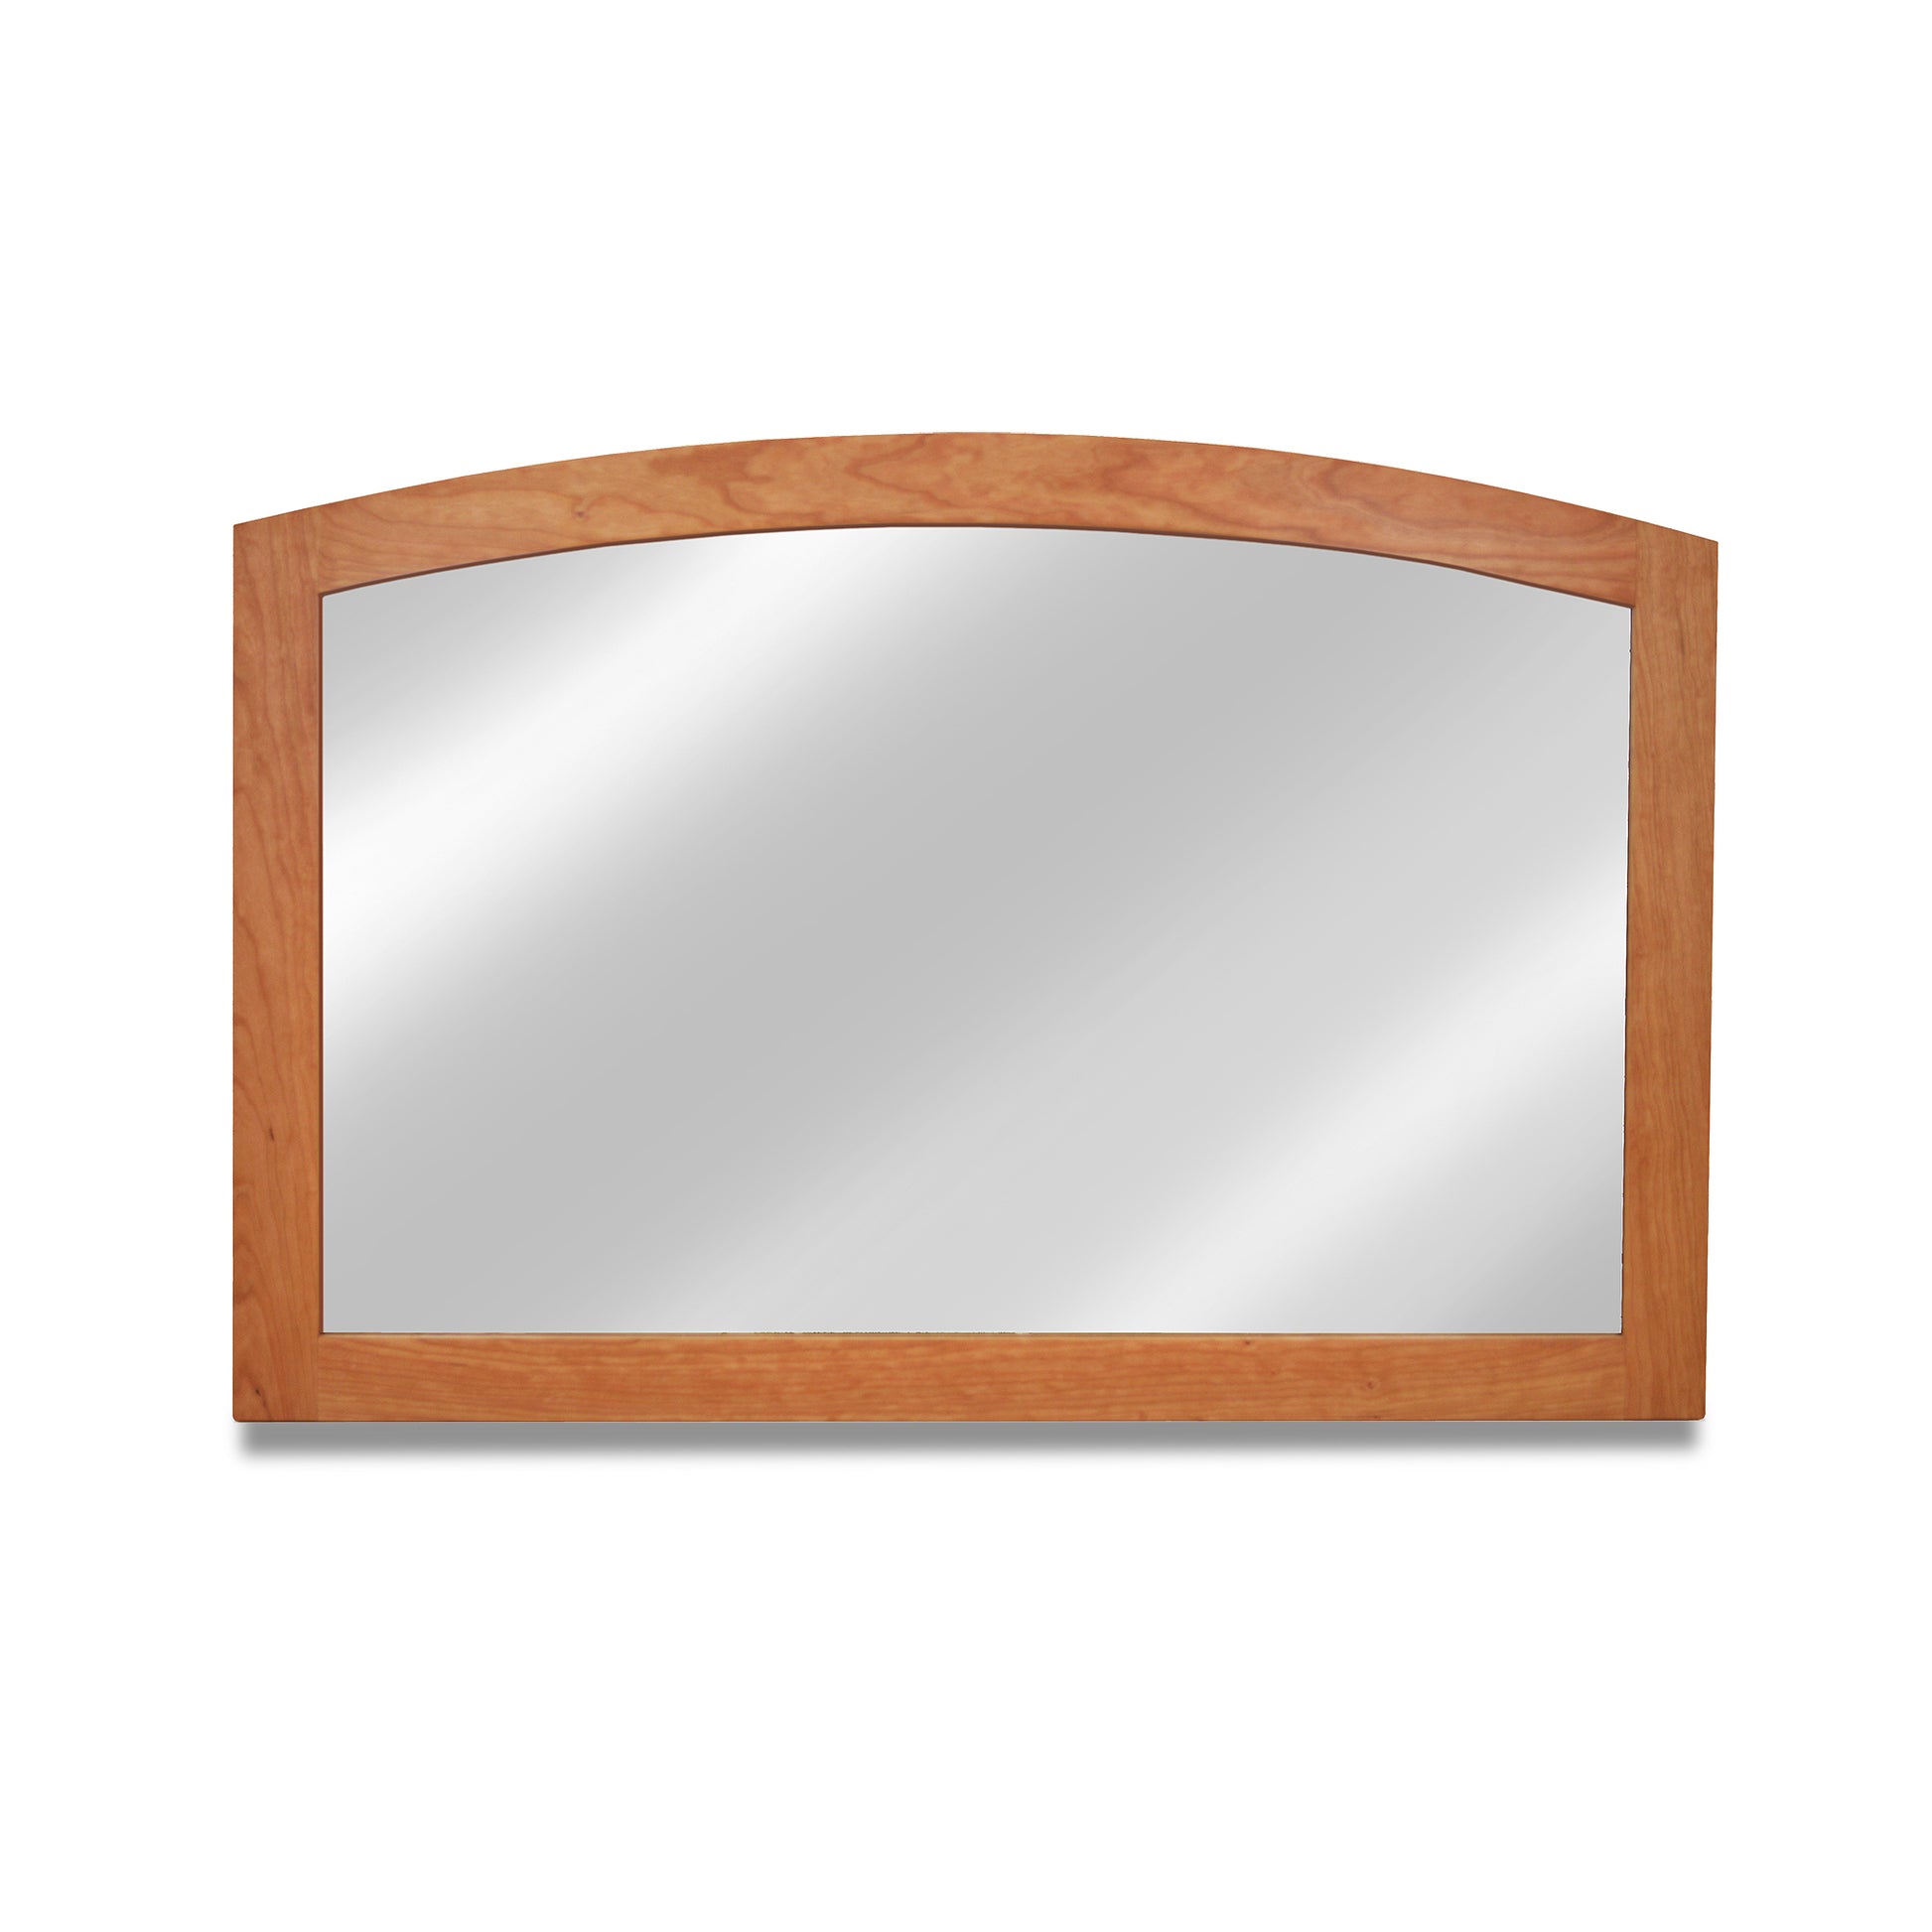 An American Shaker Arched Mirror with a hardwood frame on a white background, made by Maple Corner Woodworks.